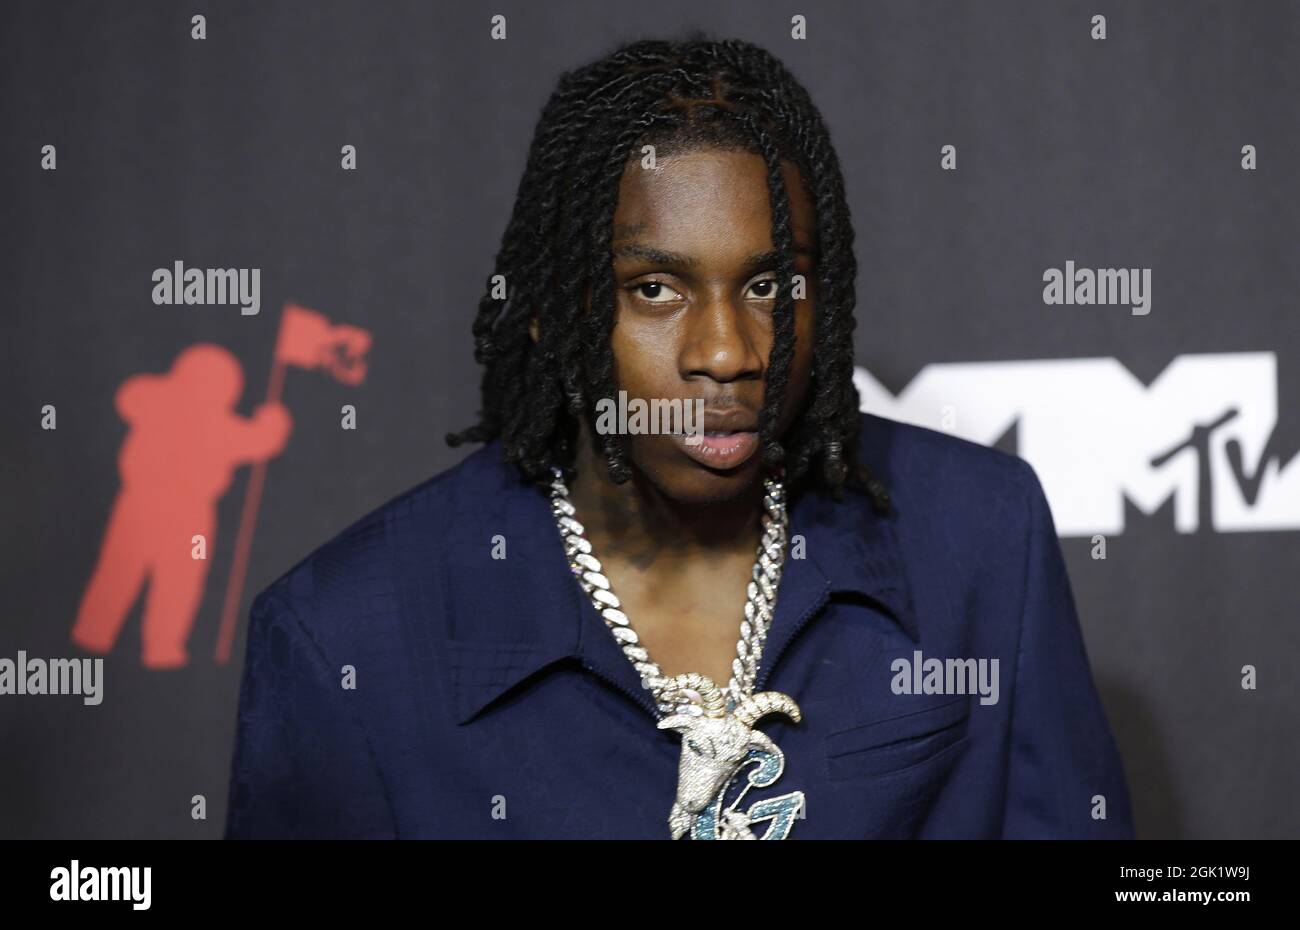 New York, United States. 12th Sep, 2021. Pre-show performer Polo G arrives  on the red carpet at the 38th annual MTV Video Music Awards at Barclays  Center in New York City on